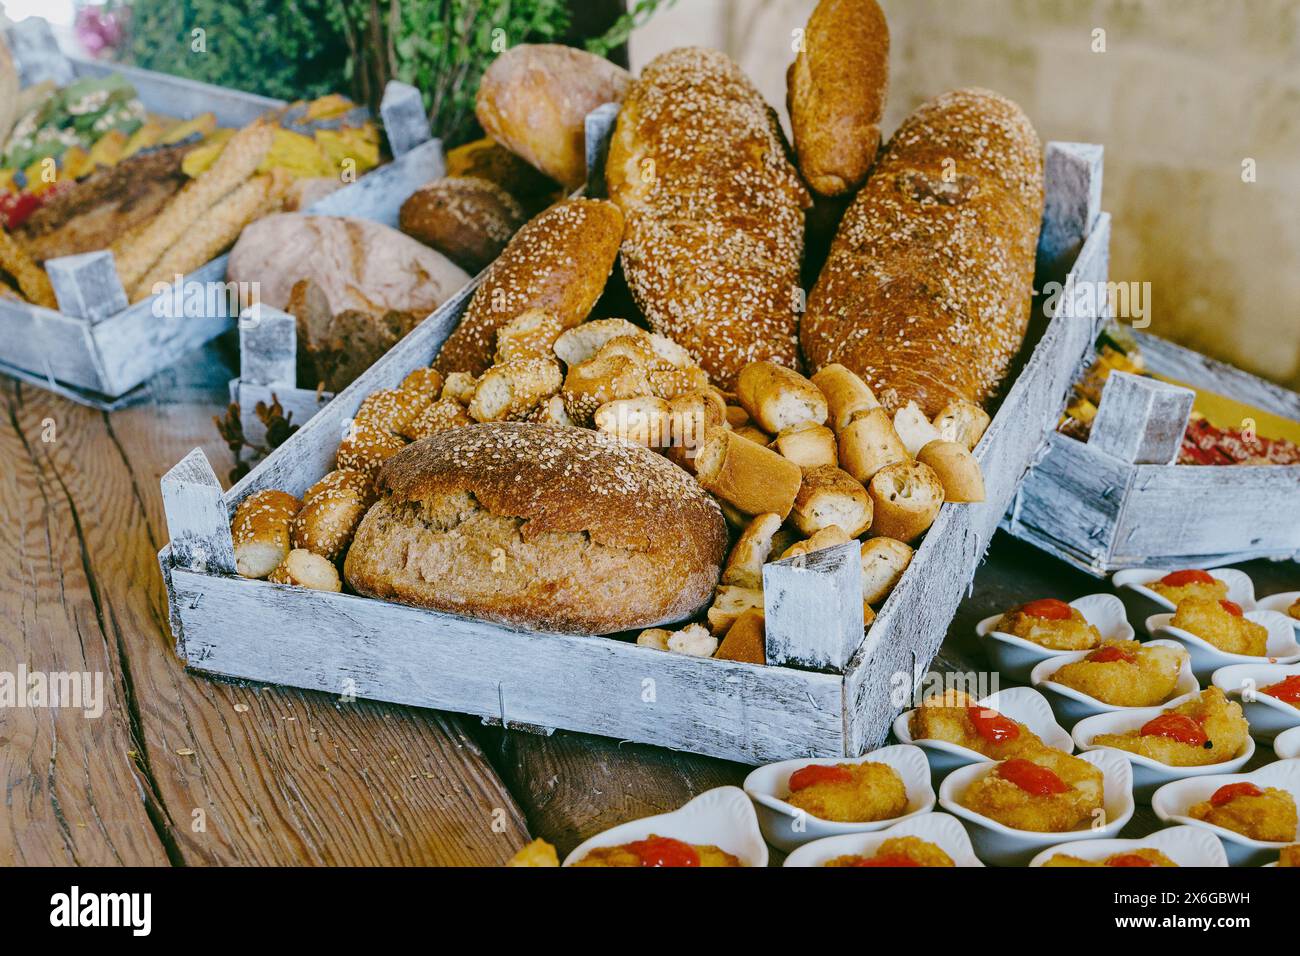 Assortment of rustic bread and gourmet appetizers displayed in wooden crates, beautifully arranged on a wooden table, showcasing a bakery product pres Stock Photo